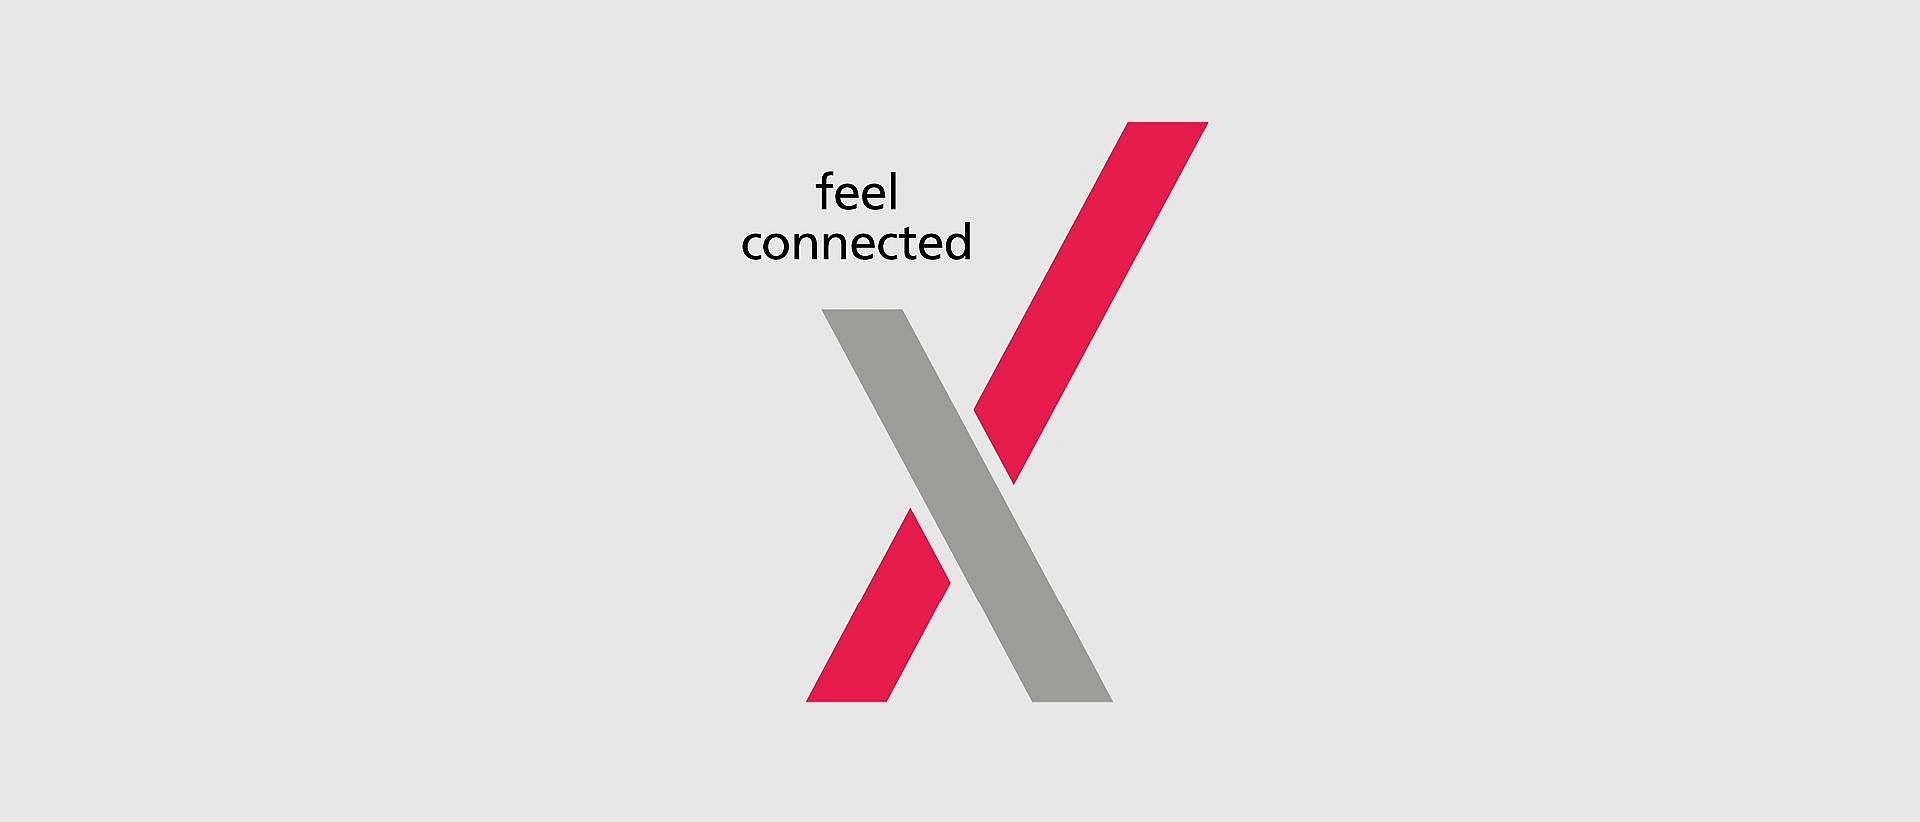 feel connected CHAPTER neu